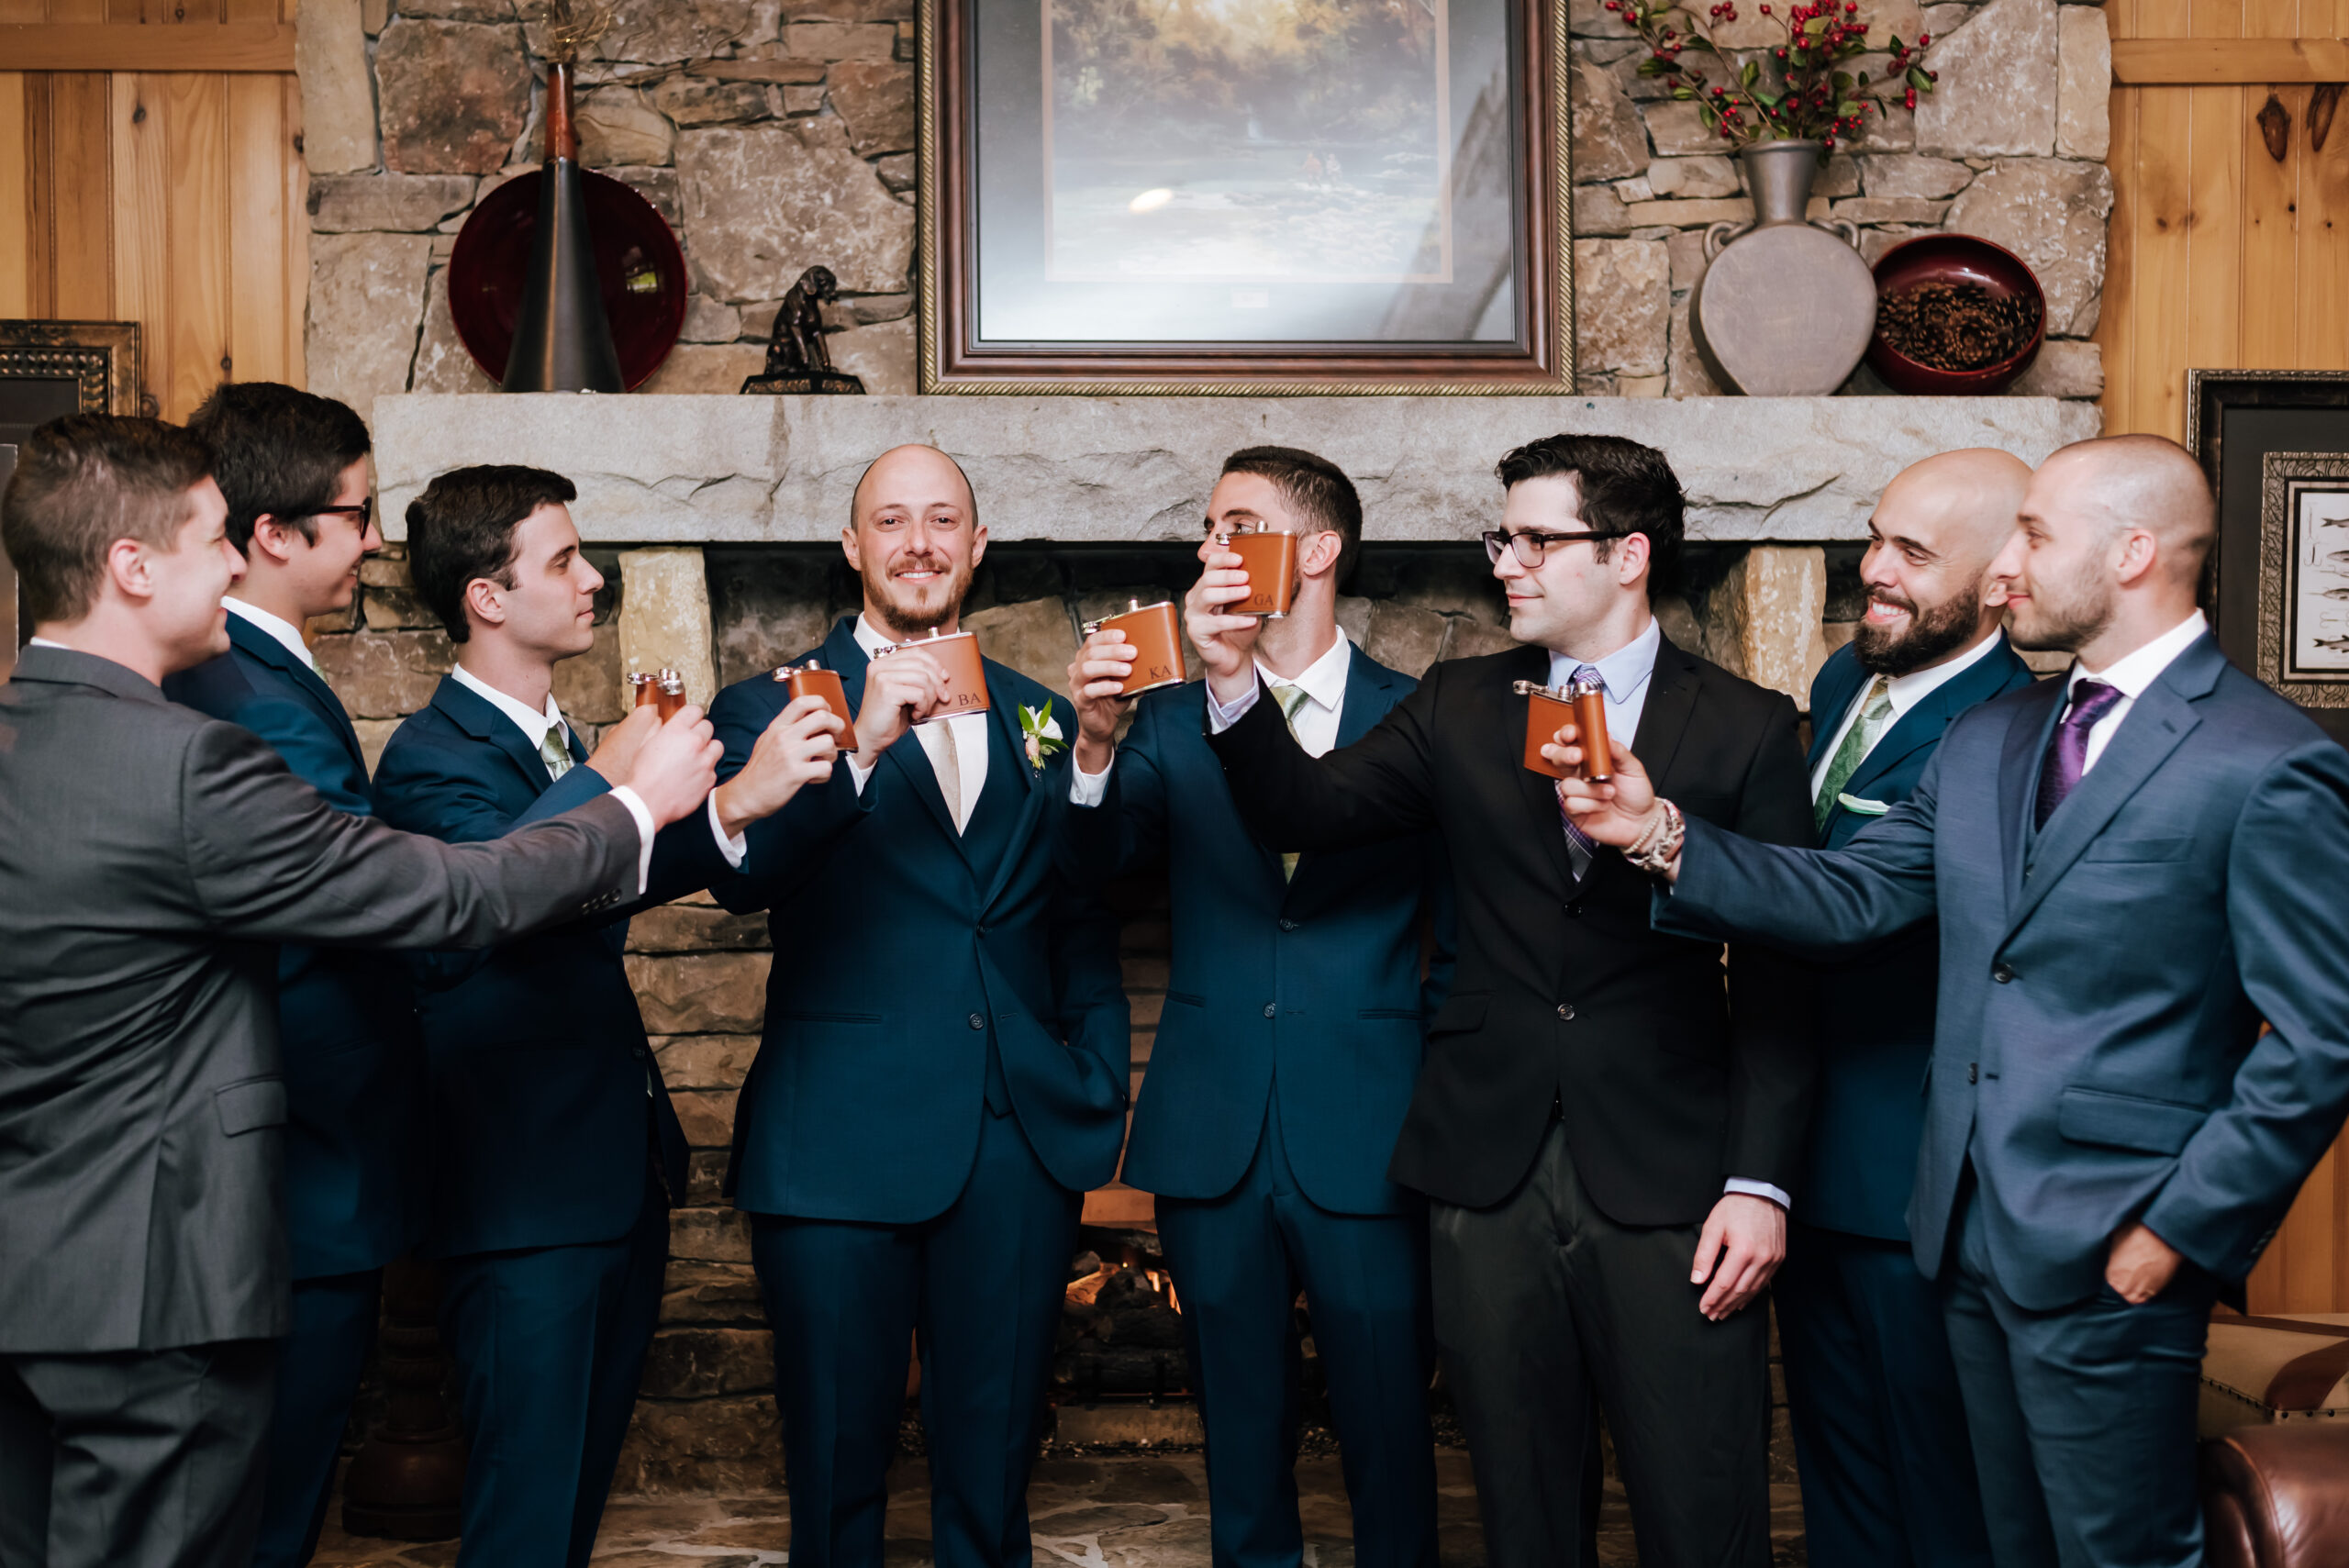 Groomsmen cheer with personalized flasks